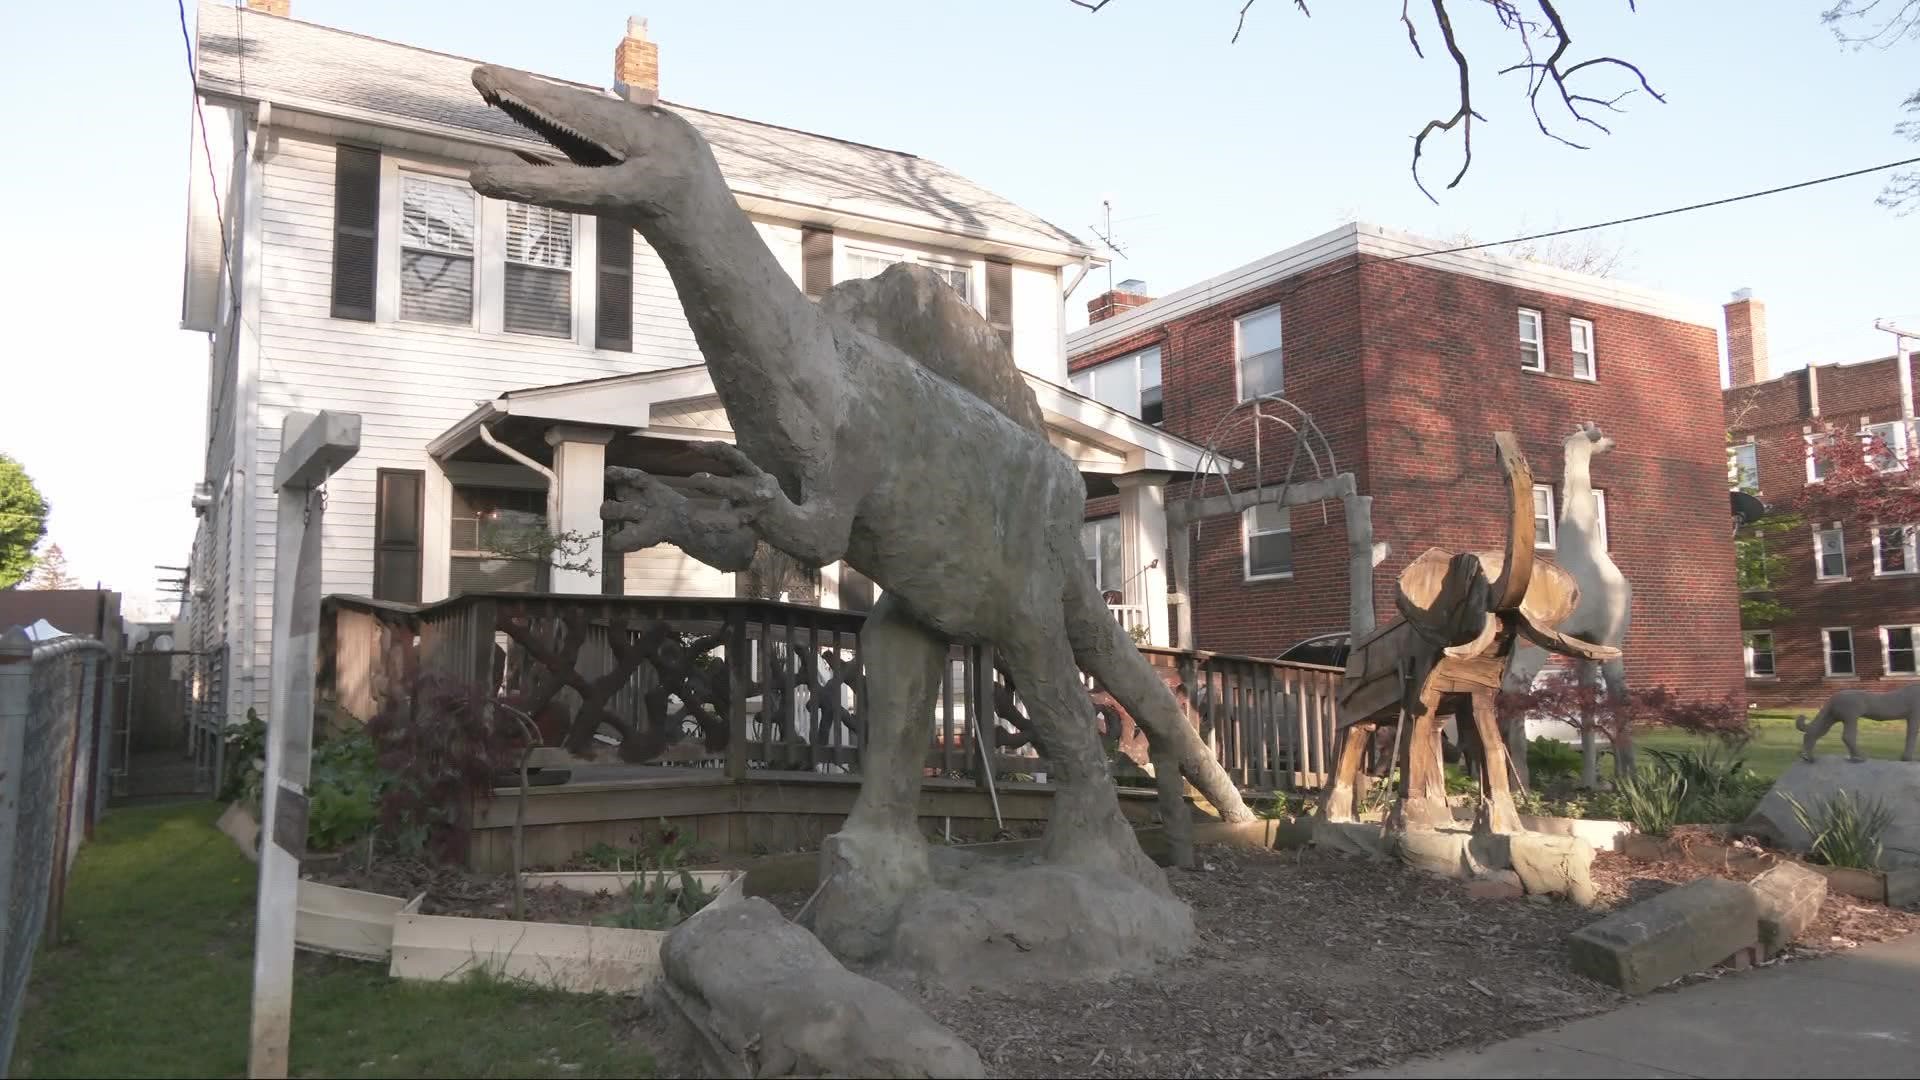 A home up for sale on Bosworth Road in Cleveland is gaining national attention for its dinosaur sculptures.